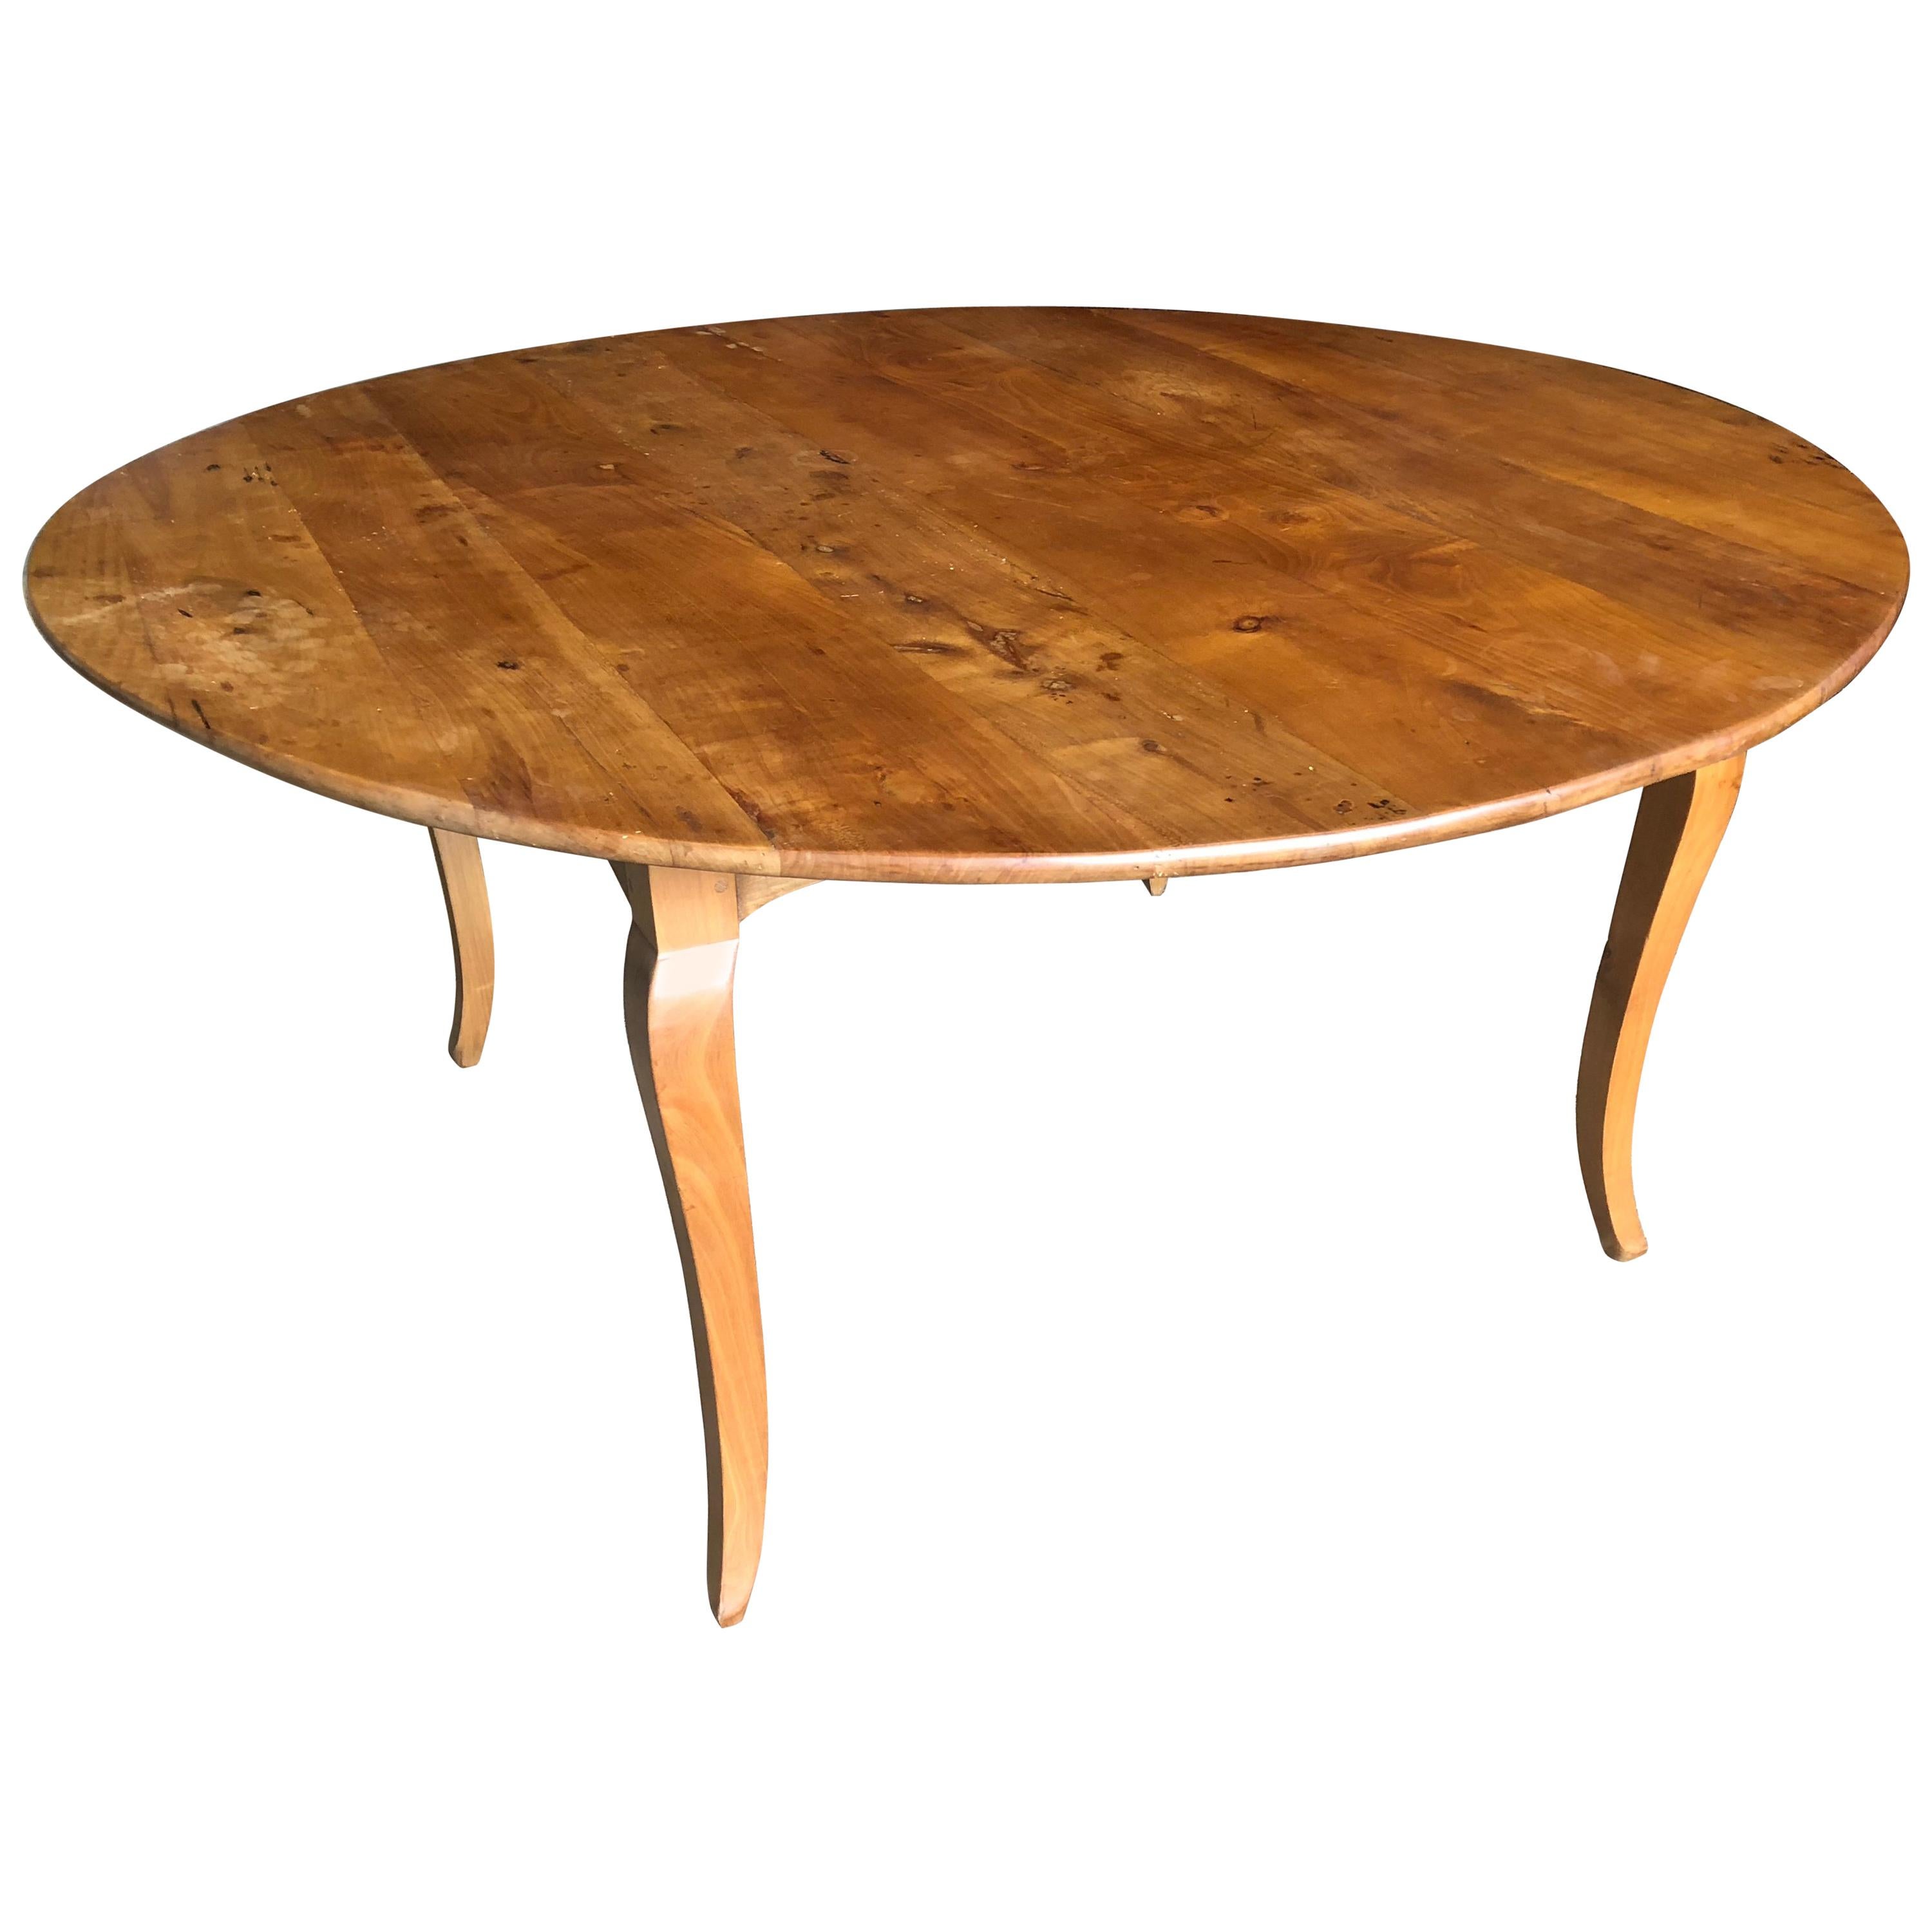 French Provincial Round Farm Table in Cherry